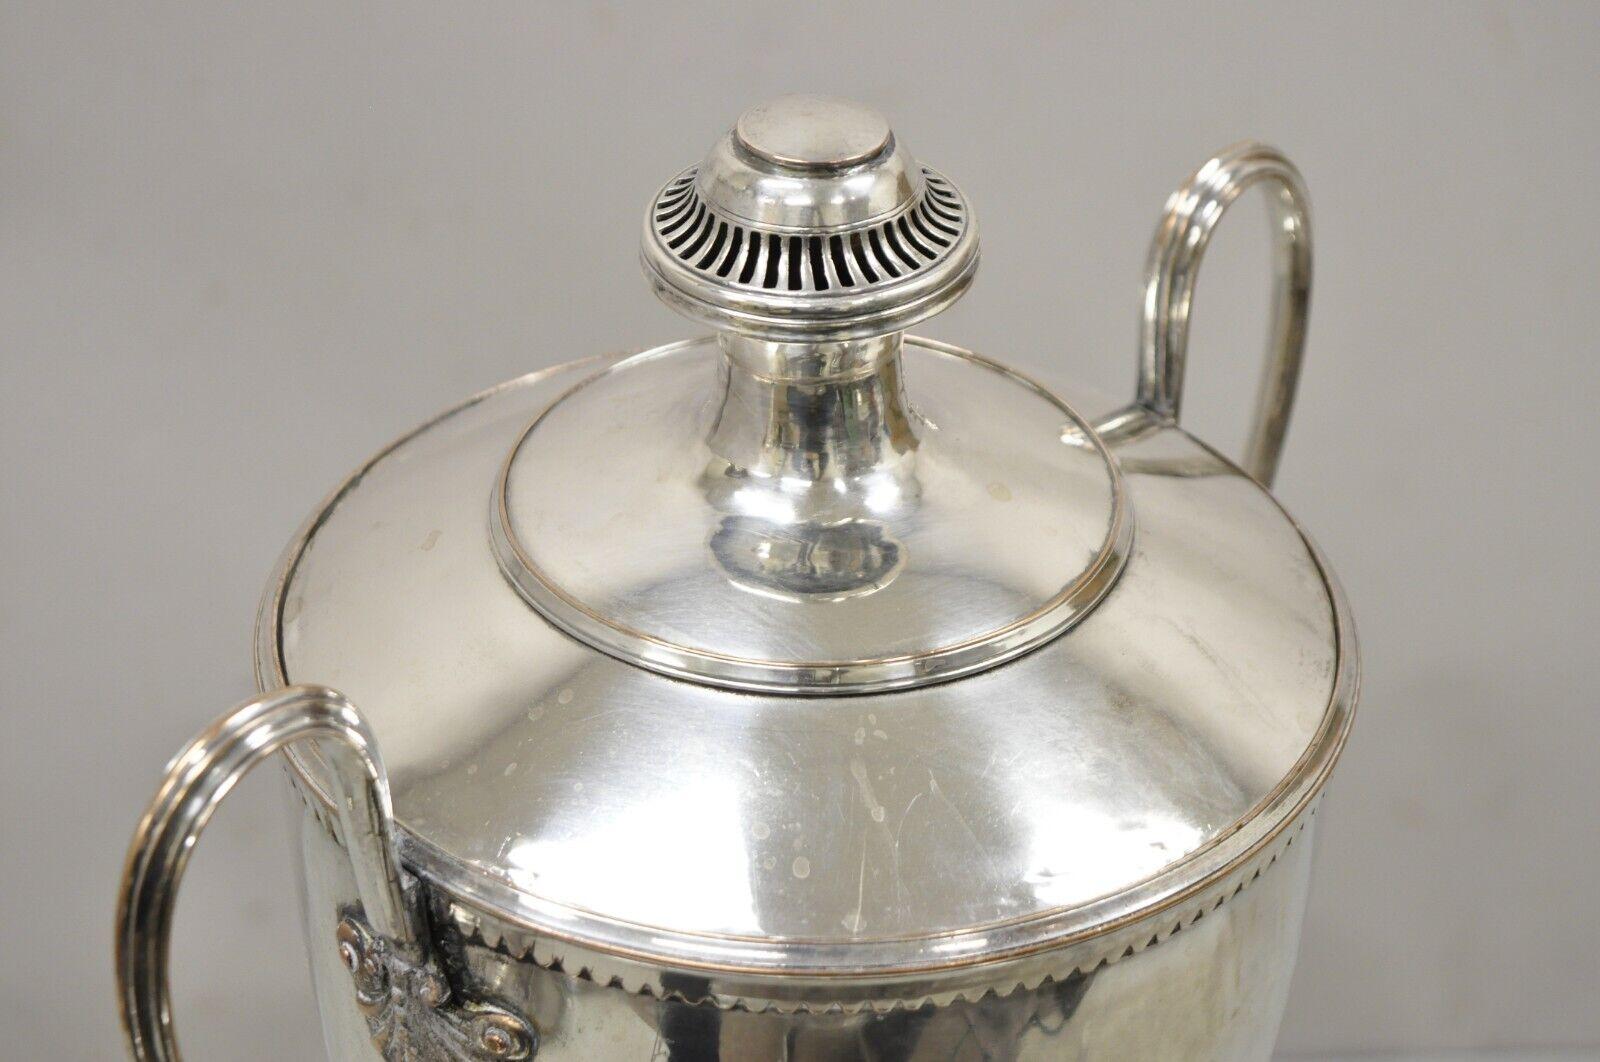 English Regency Trophy Cup Silver Plated Laurel Course Horse Race Award Samovar In Good Condition For Sale In Philadelphia, PA